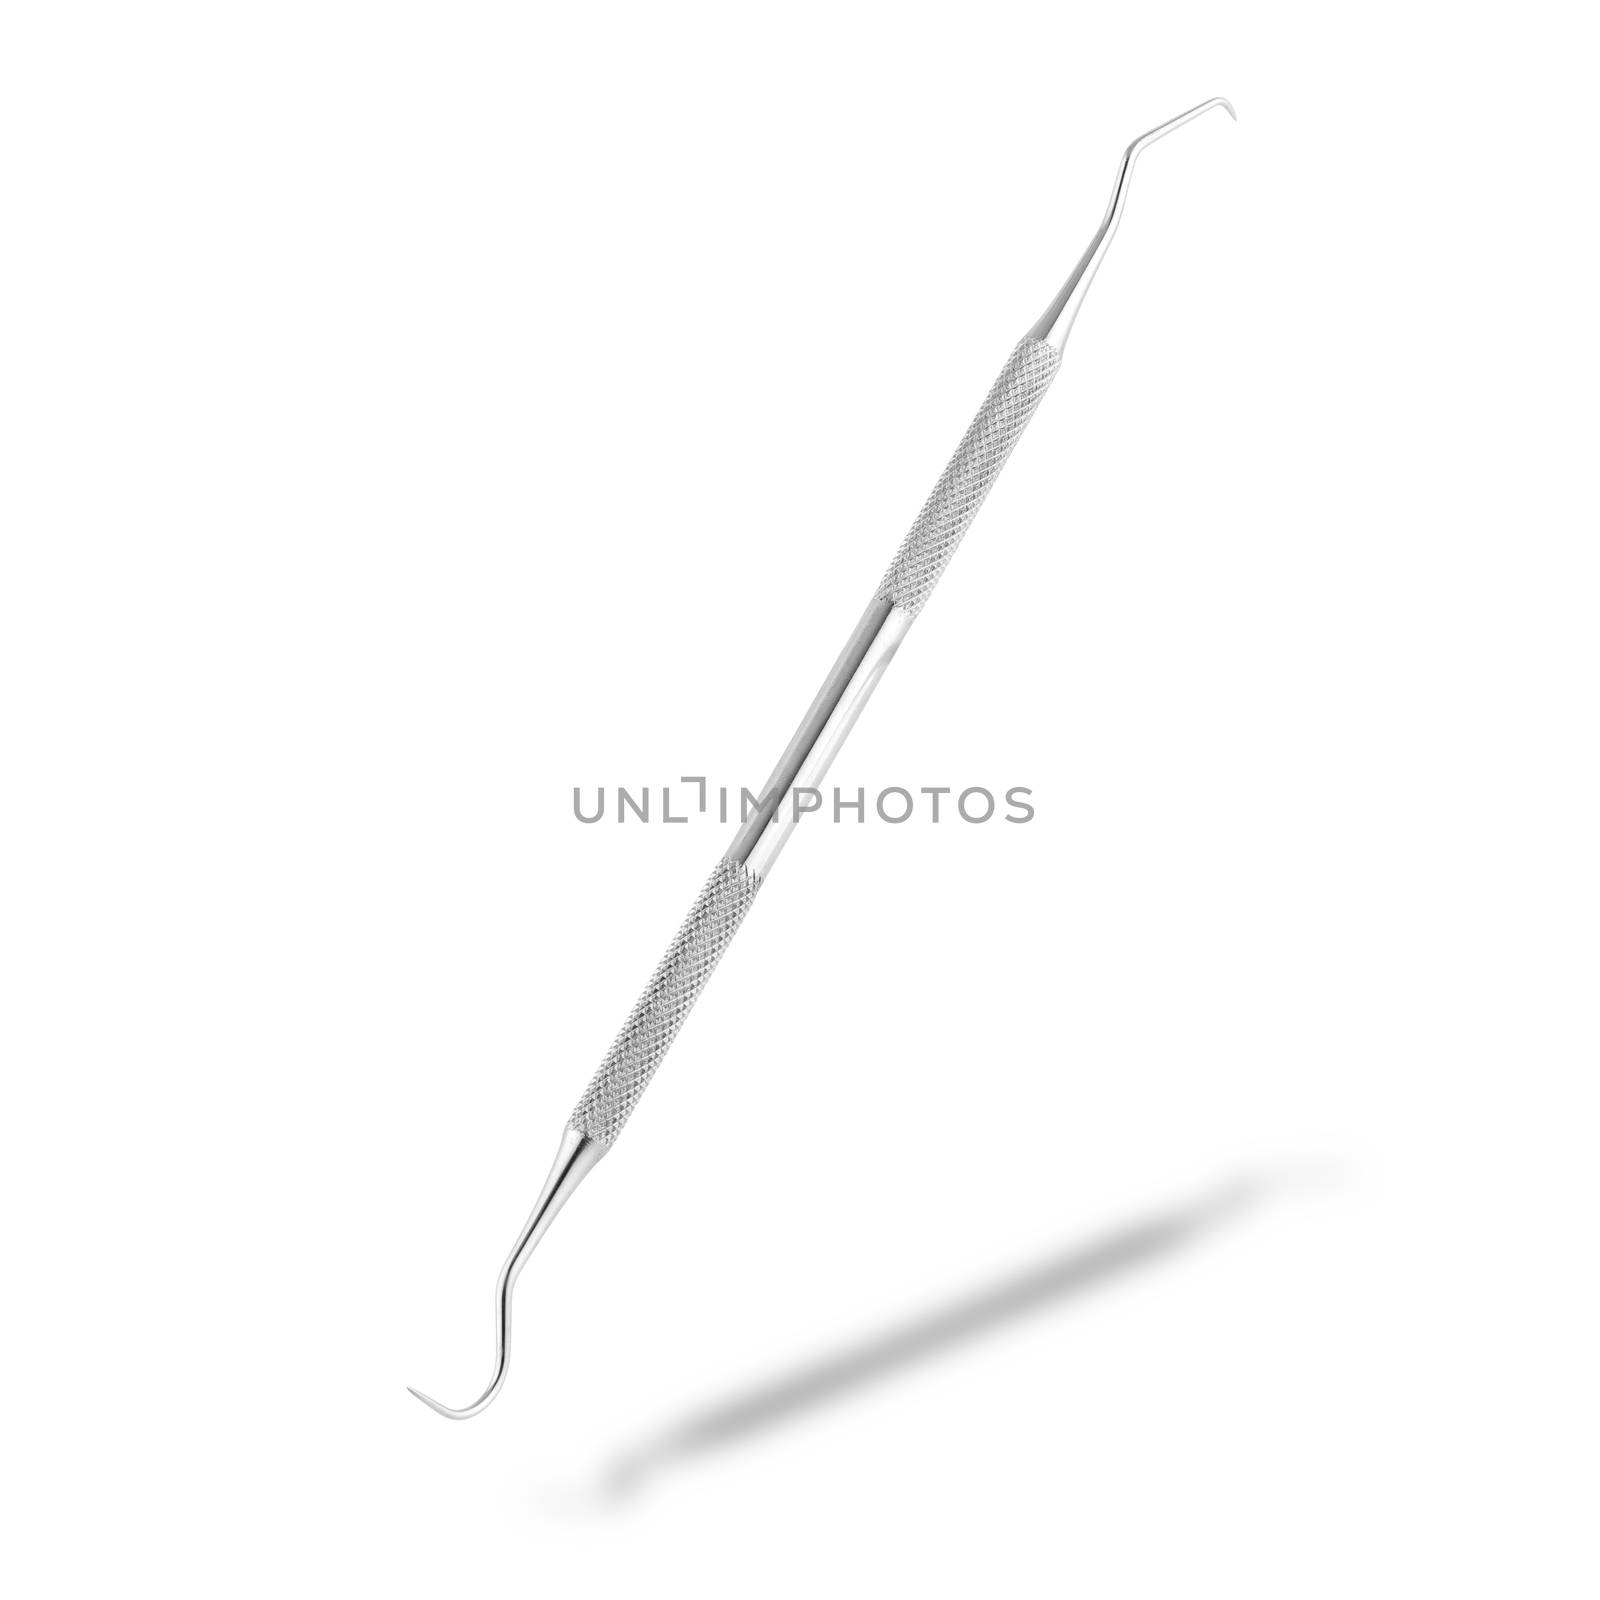 A double ended dentist's scaler and sickle probe dental explorer on white with drop shadow with clipping path